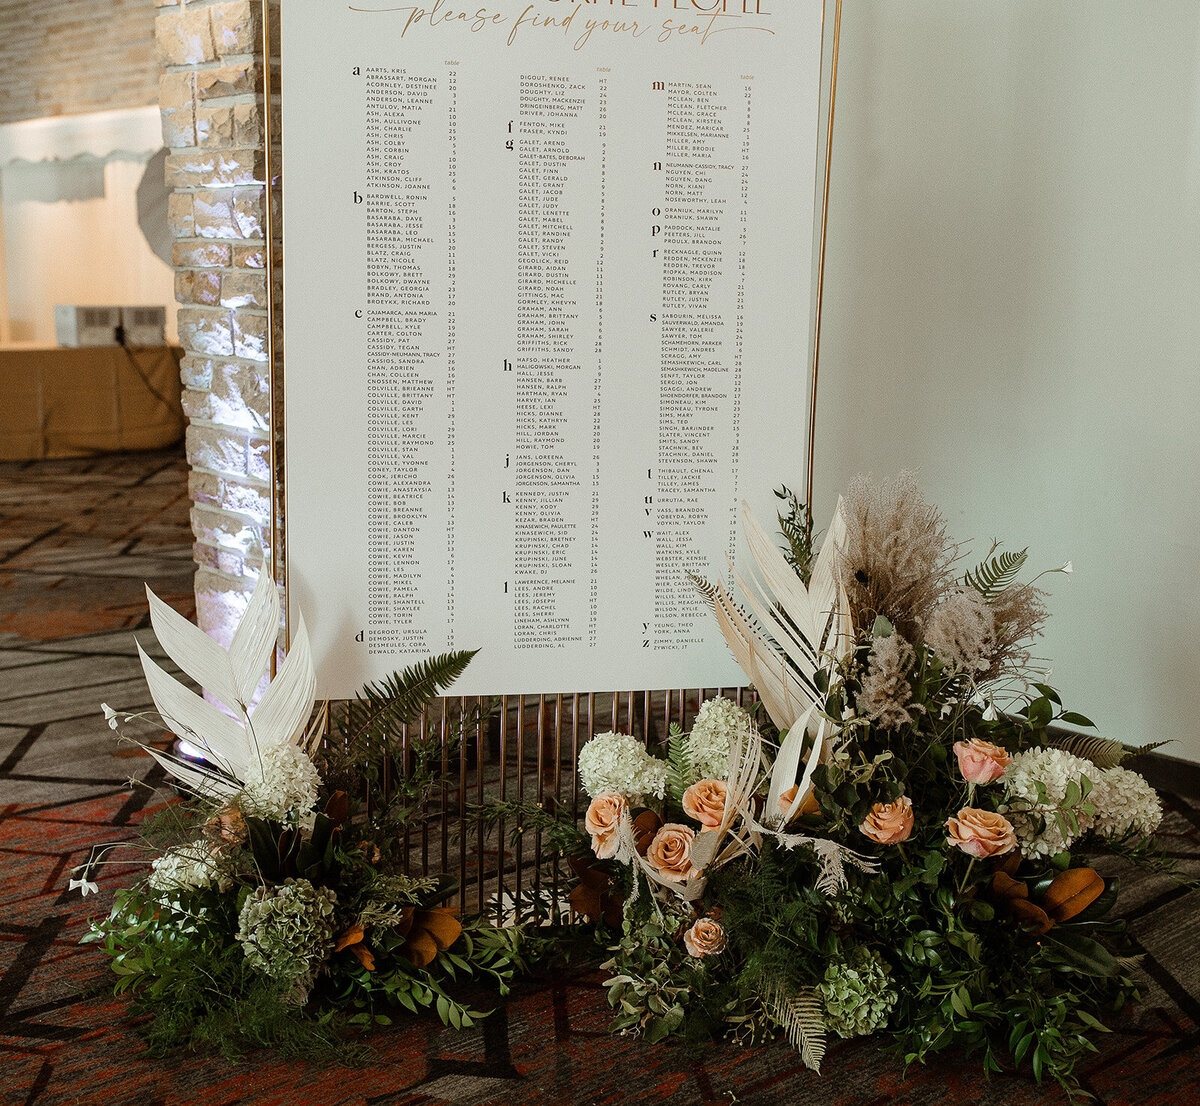 Jasper Park Lodge Wedding Seating Chart with Florals